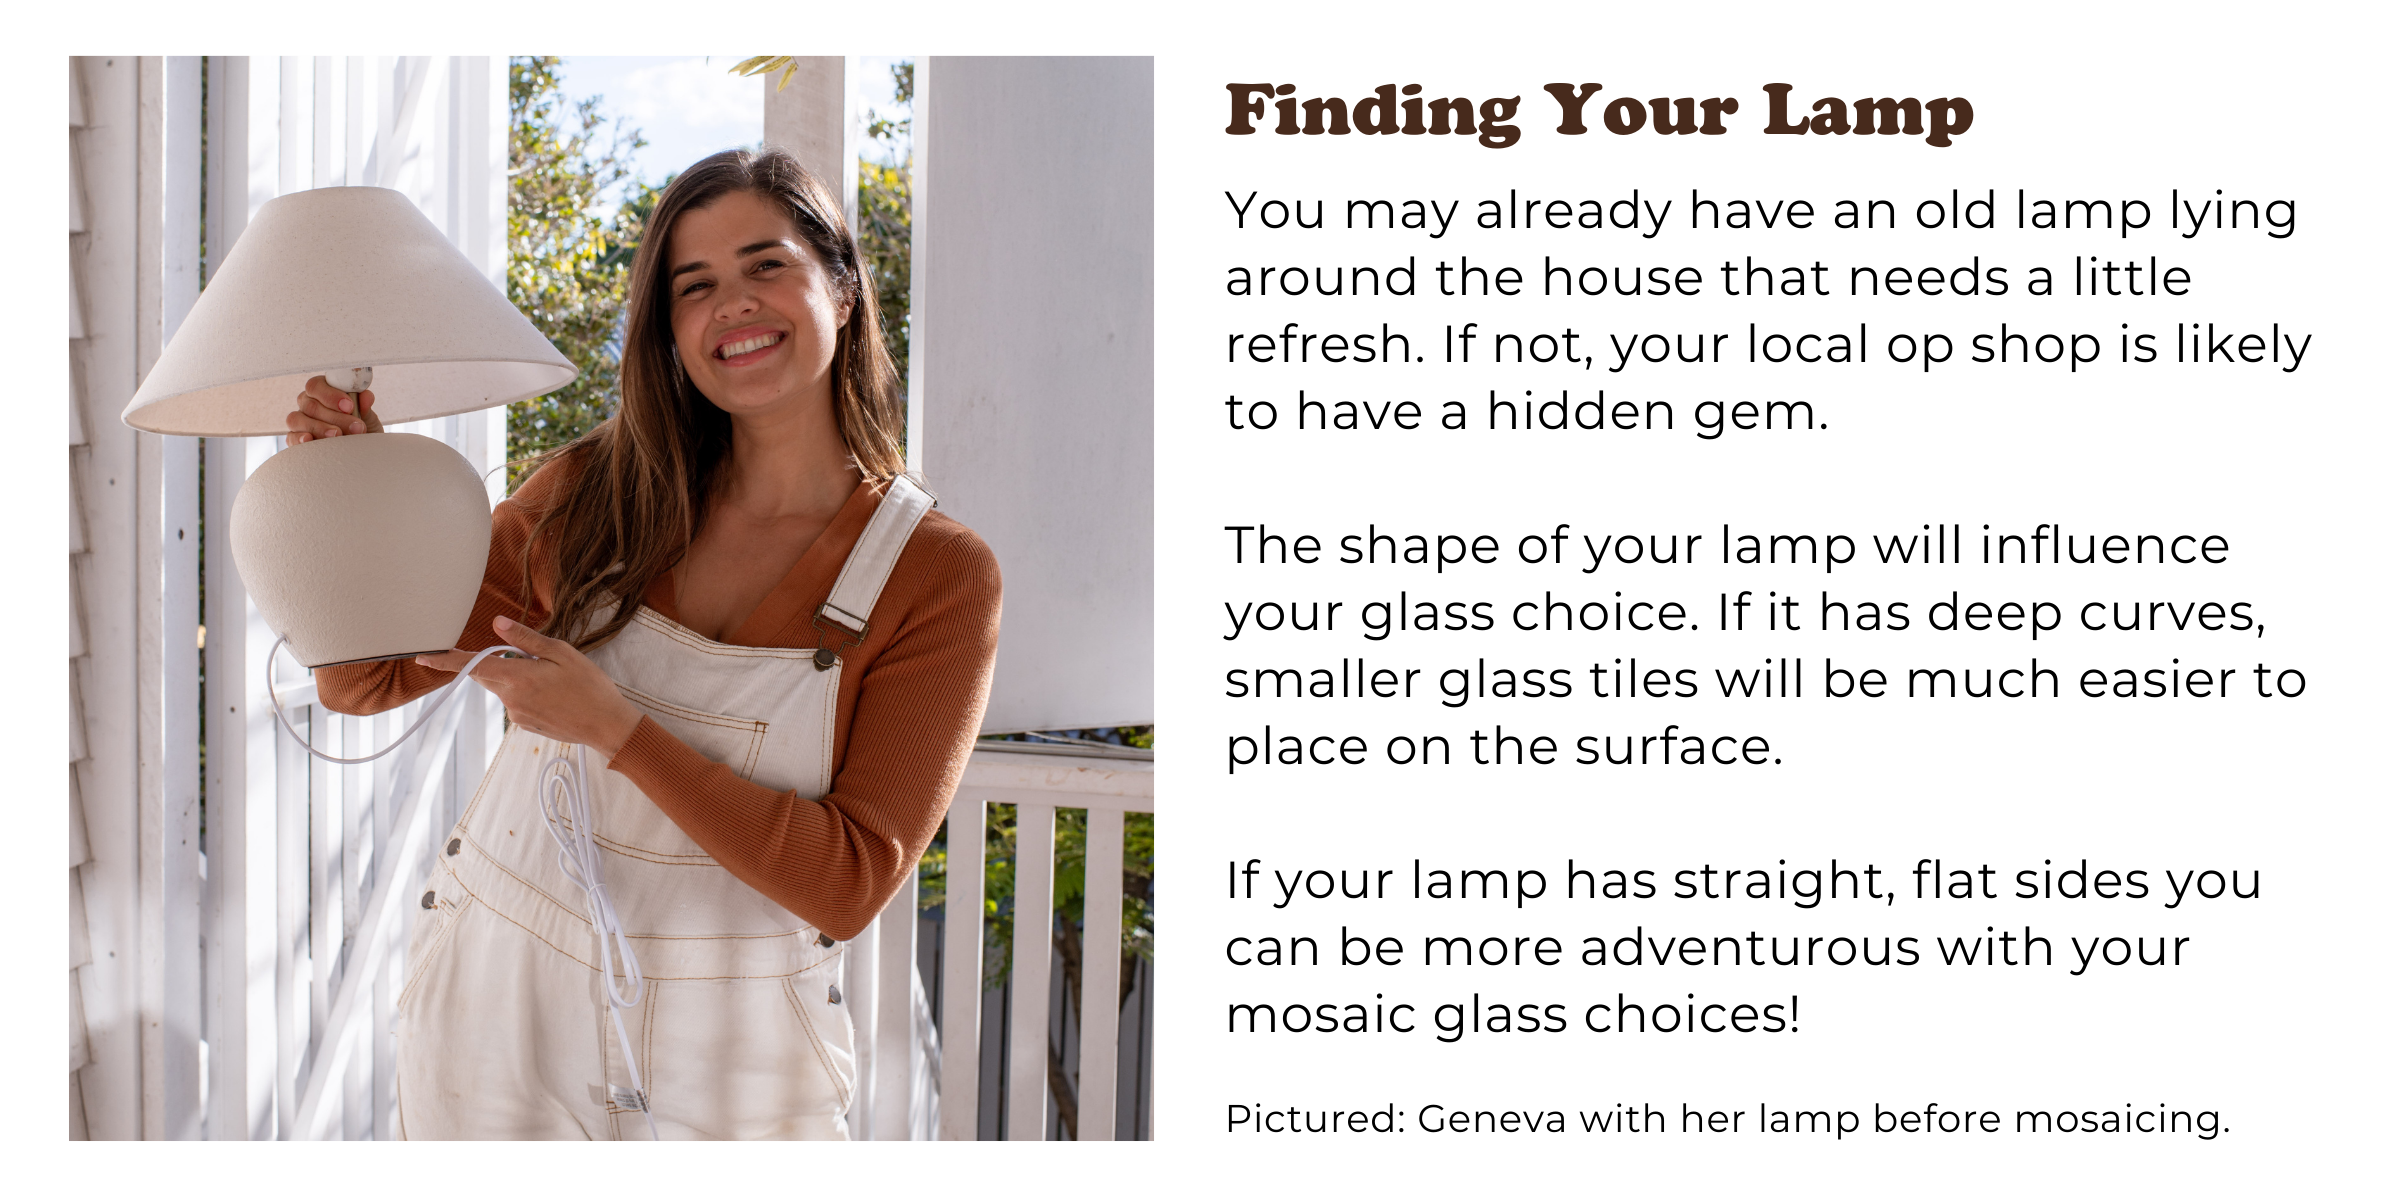 Finding your lamp to mosaic